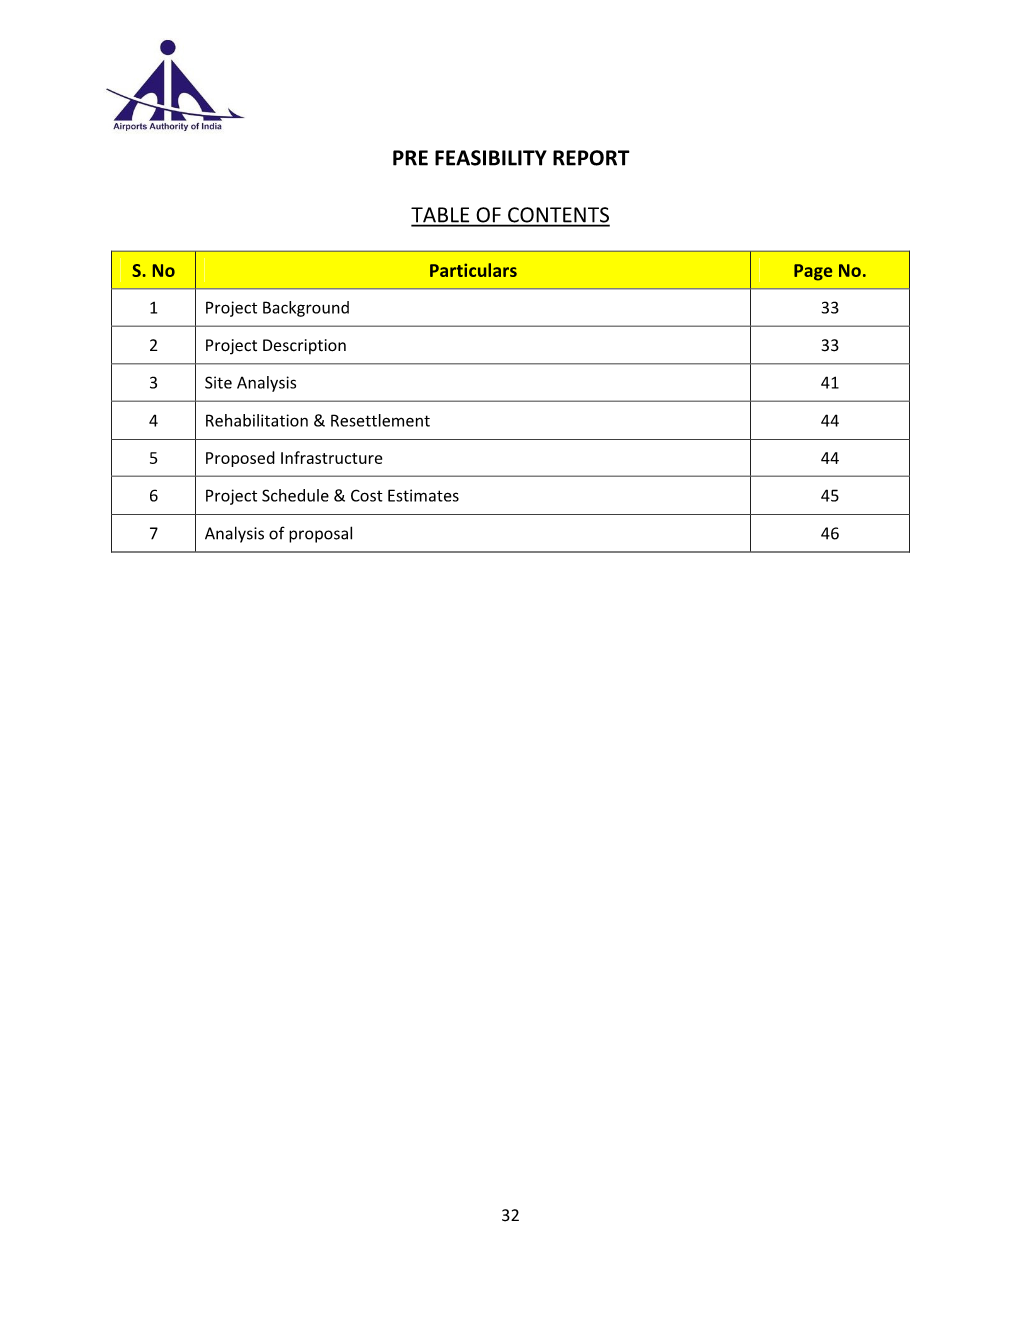 Pre Feasibility Report Table of Contents